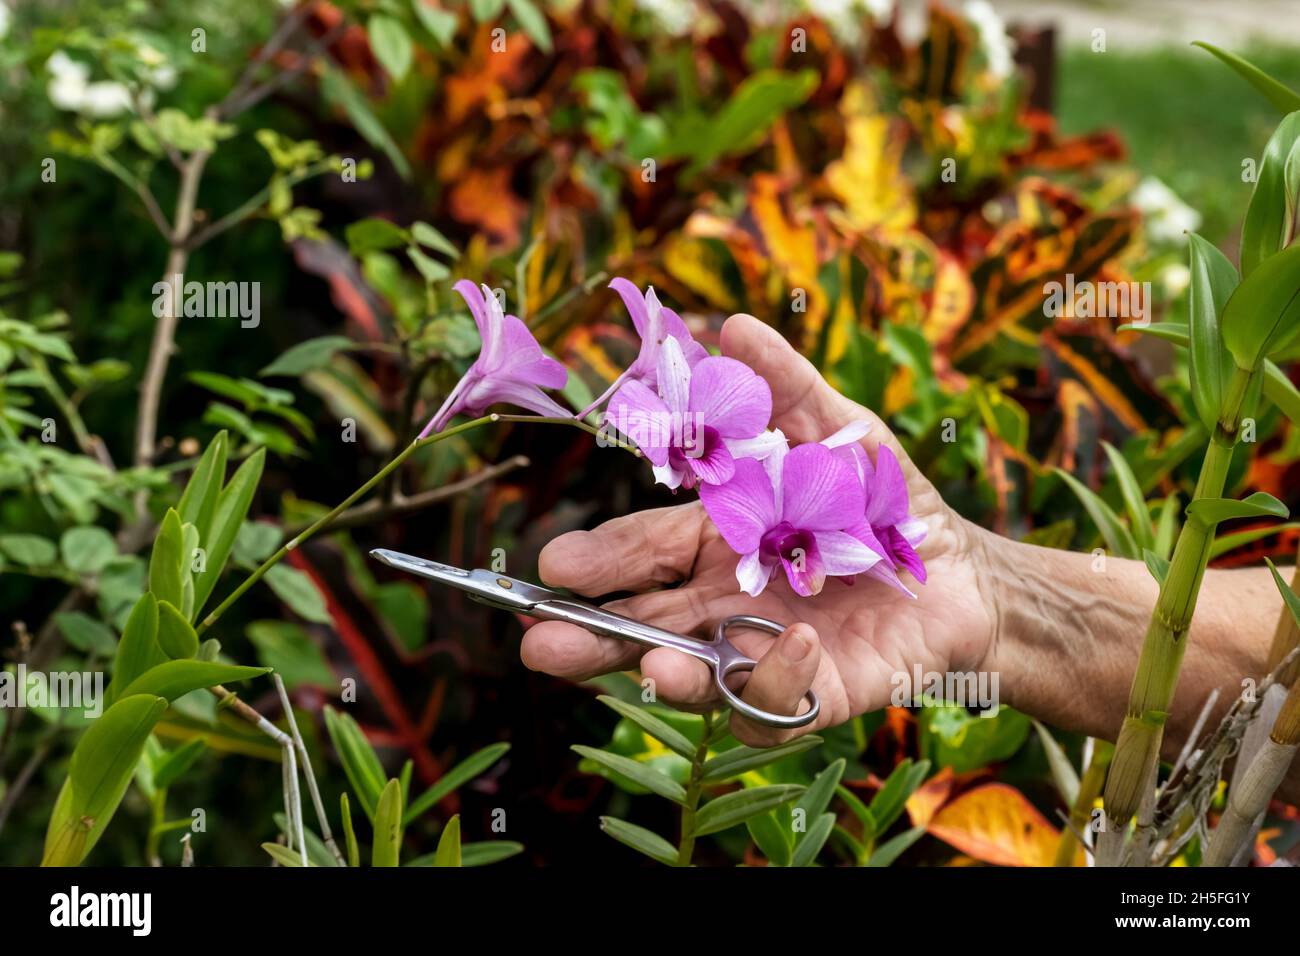 The hand of a senior Latin woman about to grab the purple flowers of an orchid plant, she has scissors in her hand, she is securing them with her litt Stock Photo